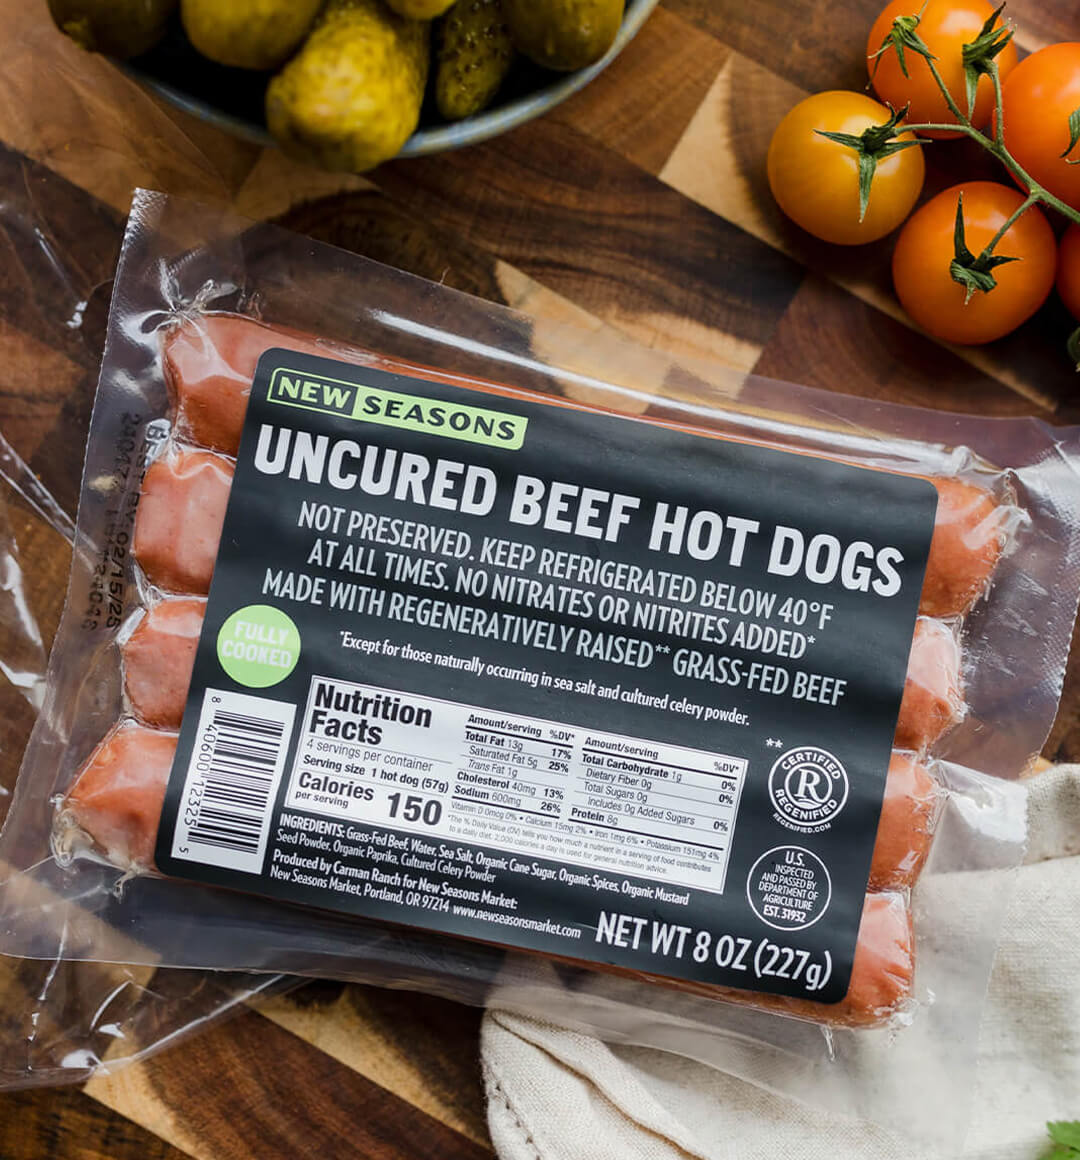 a package of New Seasons uncured beef hot dogs on a wood board with tomatoes in the background.